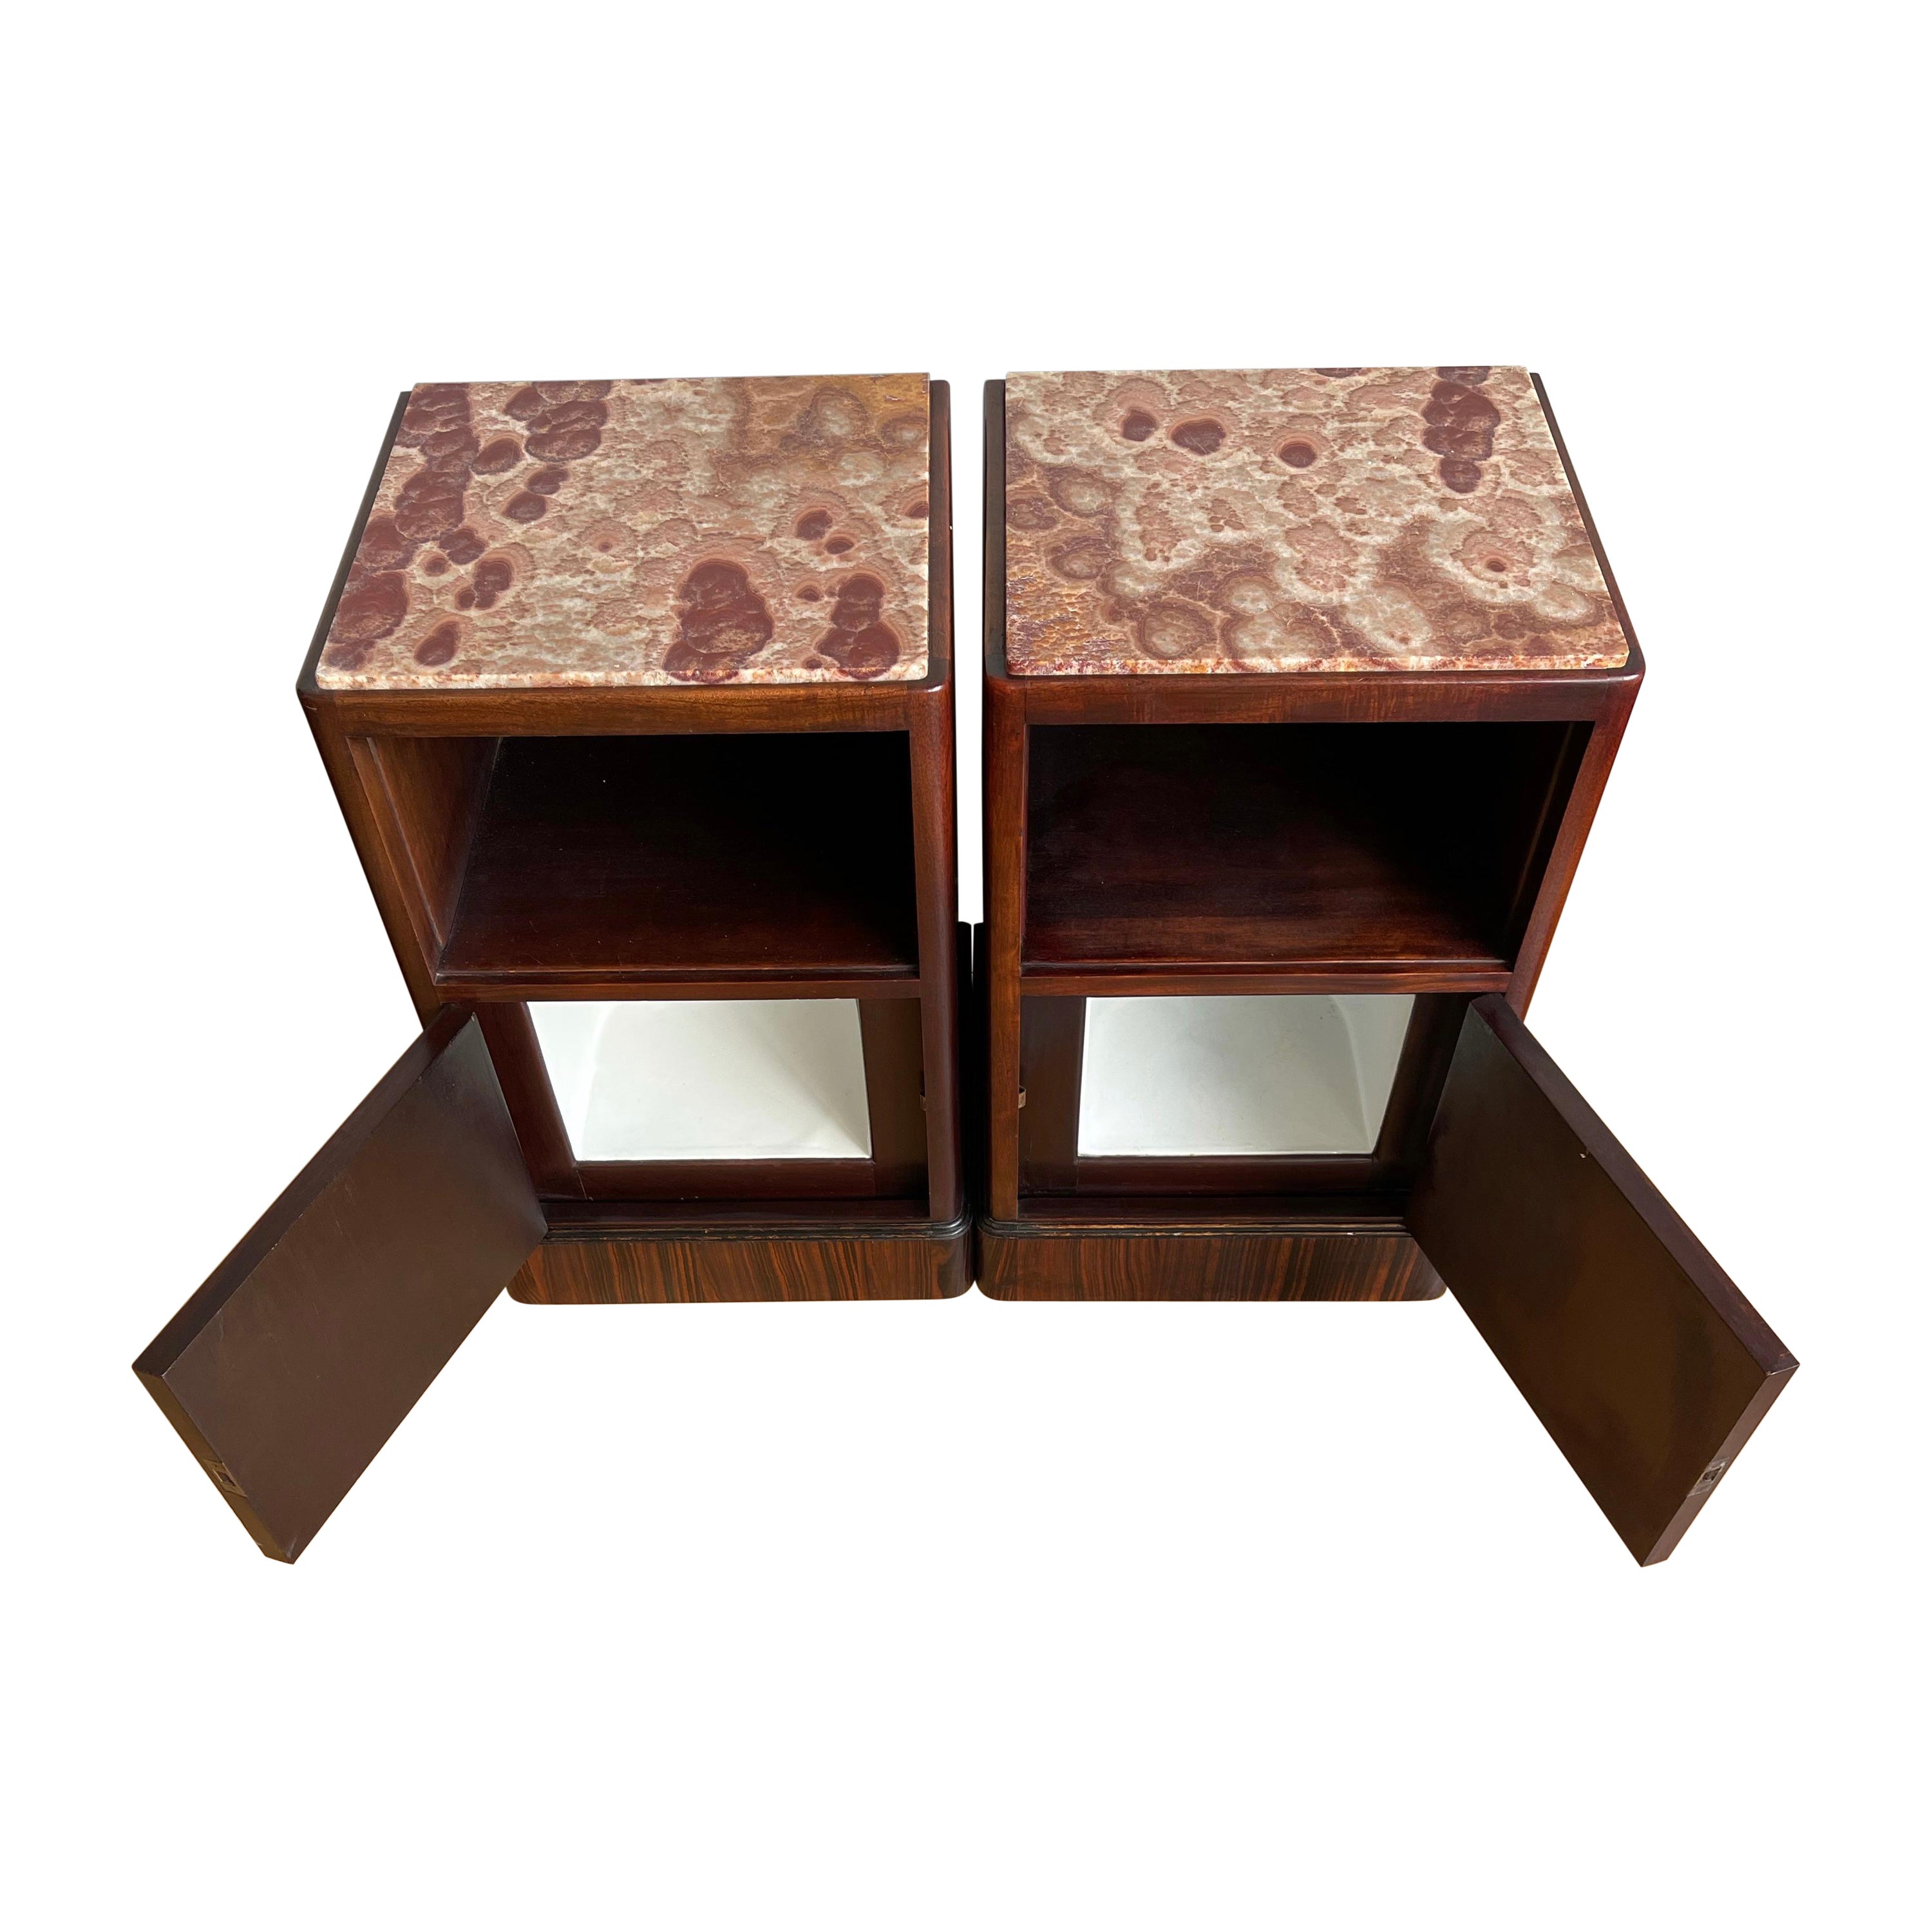 Finest quality and condition, pair of Art Deco bedside cabinets or tables with fine marble top, 1920s.

We are proud to offer these top-quality masterpieces from the heydays of the Art Deco period. The combination of the stylish lines in the design